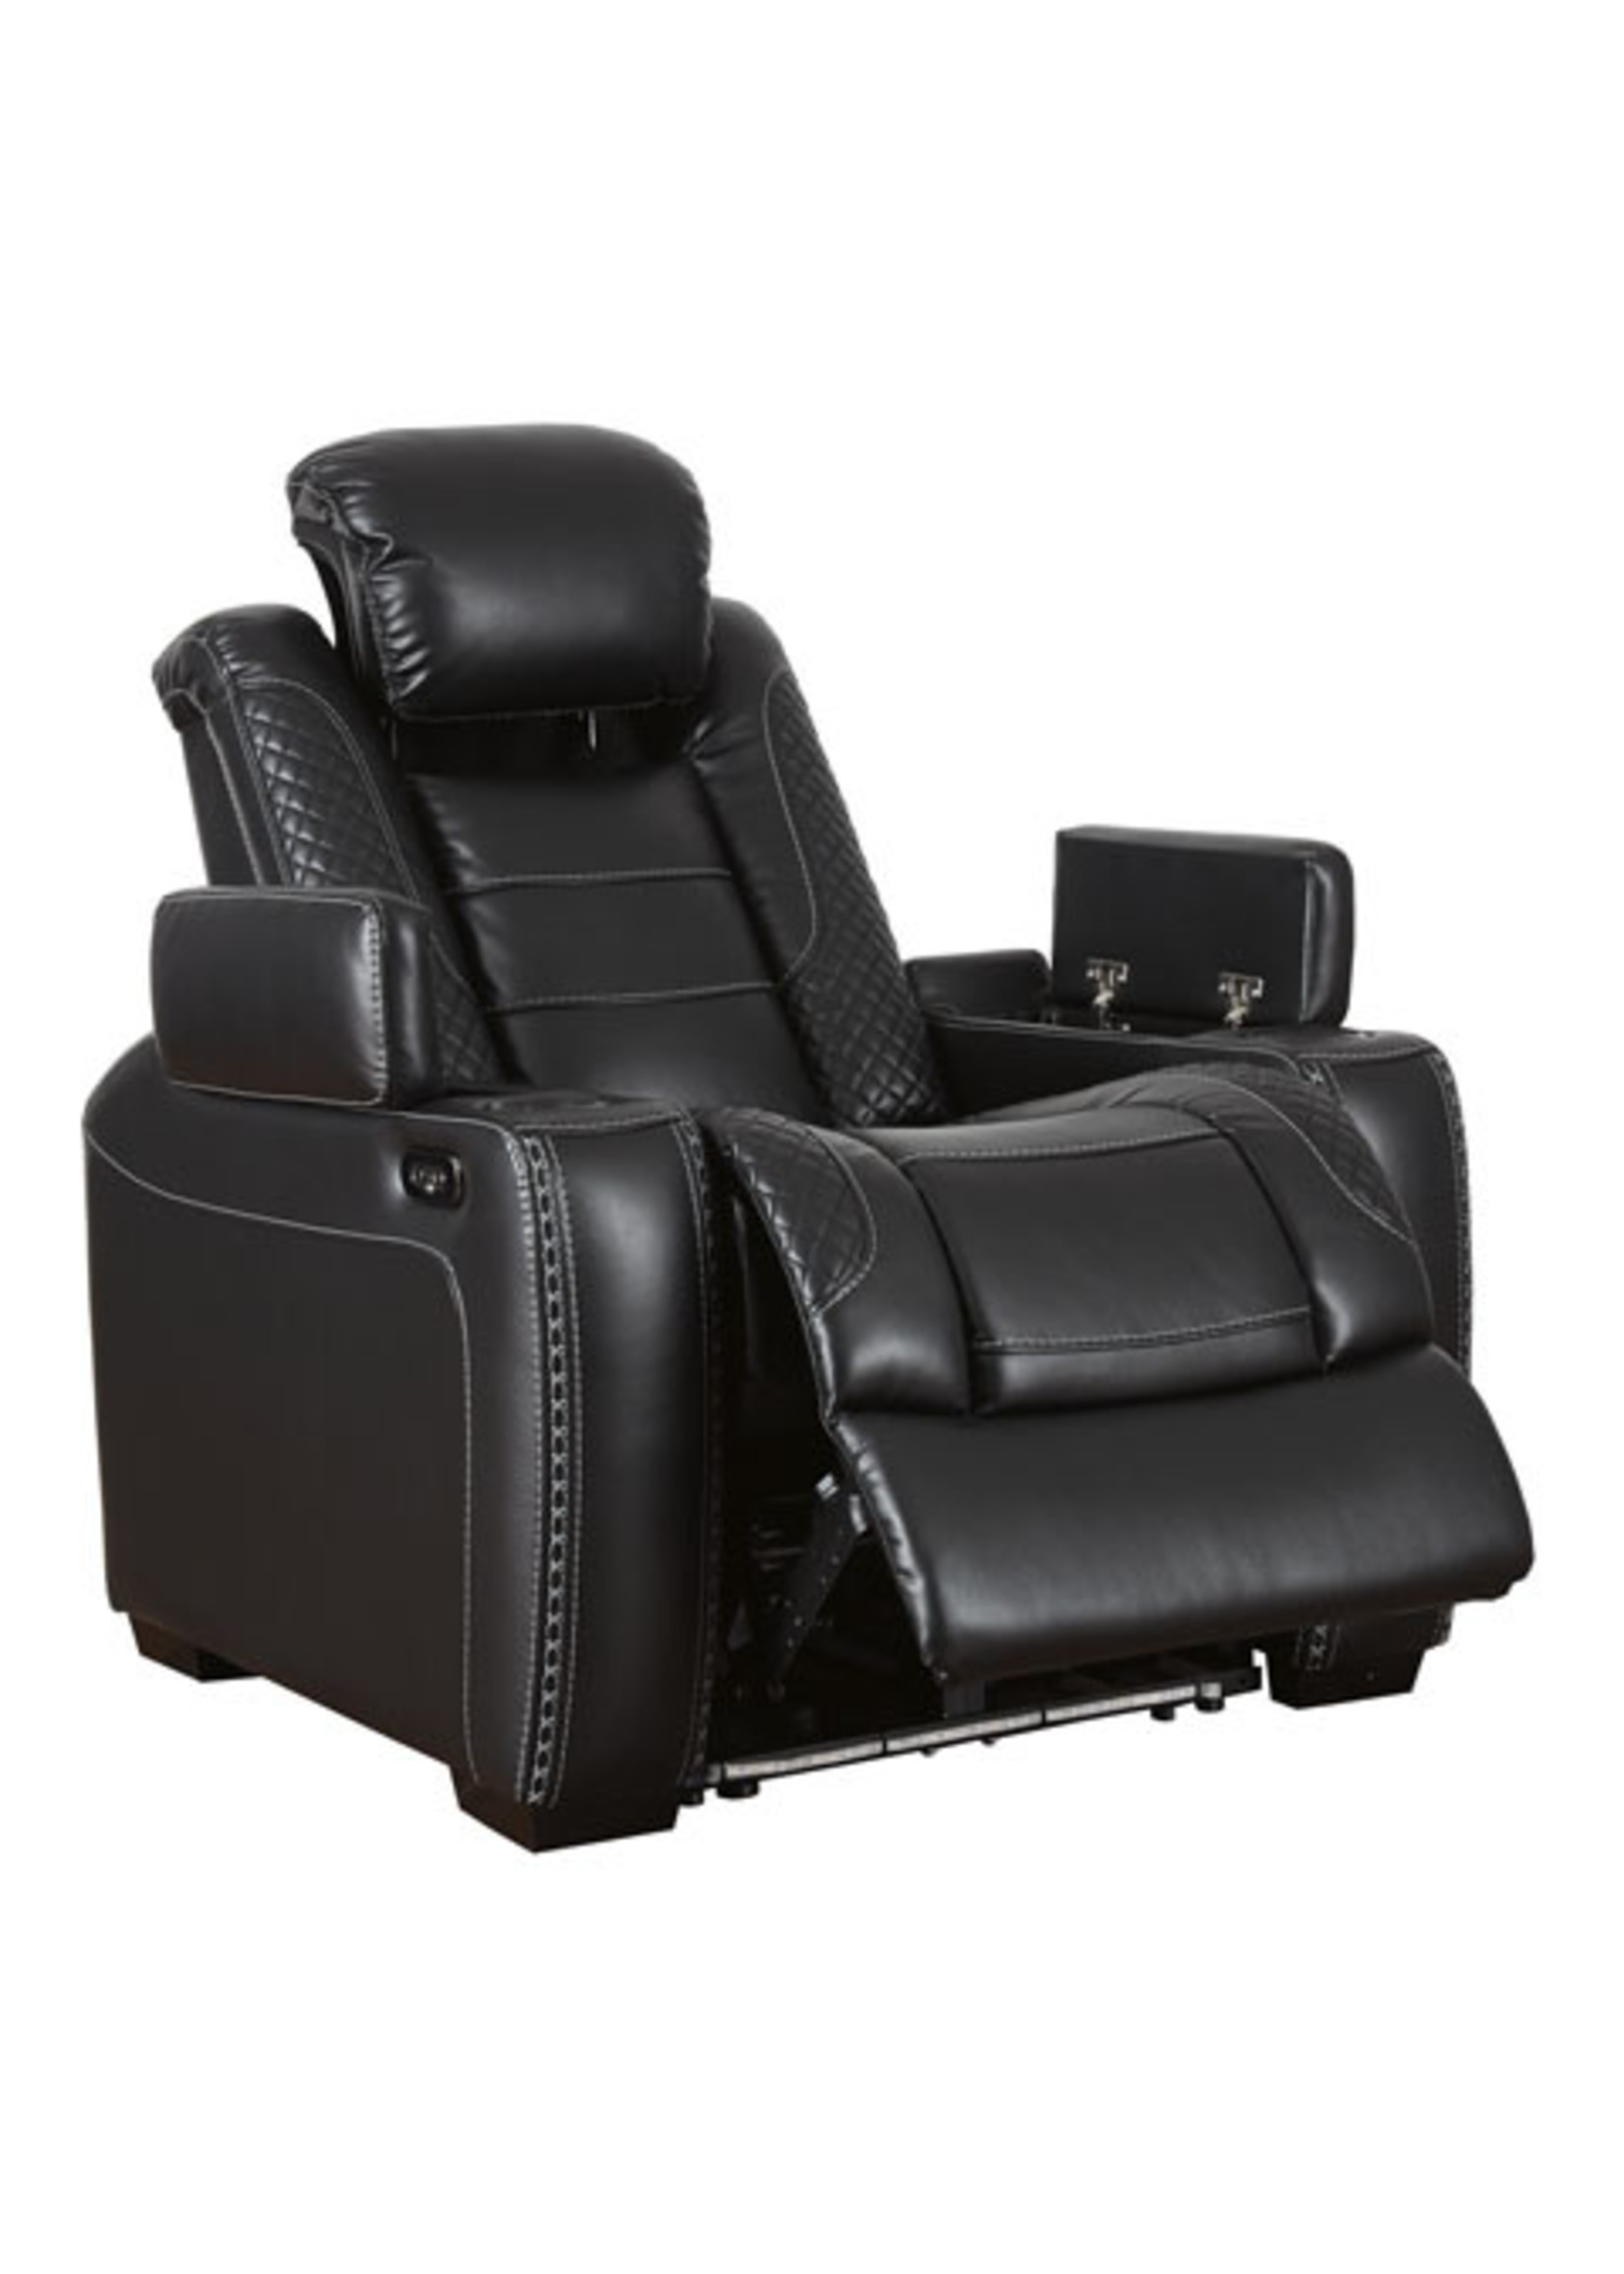 ASHLEY PARTY TIME POWER RECLINER BLACK W/LIGHTS